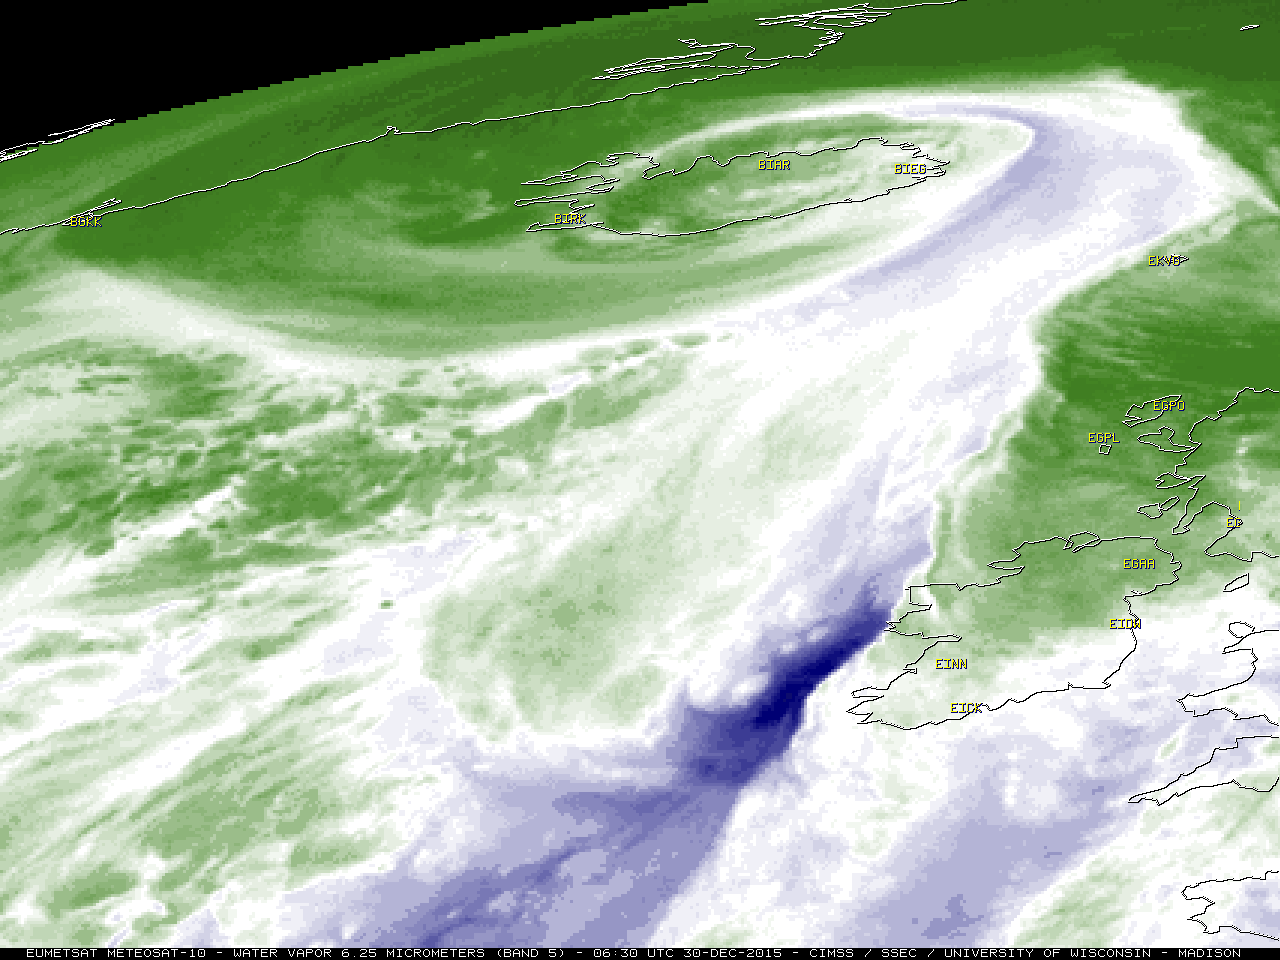 Meteosat-10 Water Vapor (6.25 µm) image at 0630 UTC on 30 December, with surface station IDs [click to enlarge]